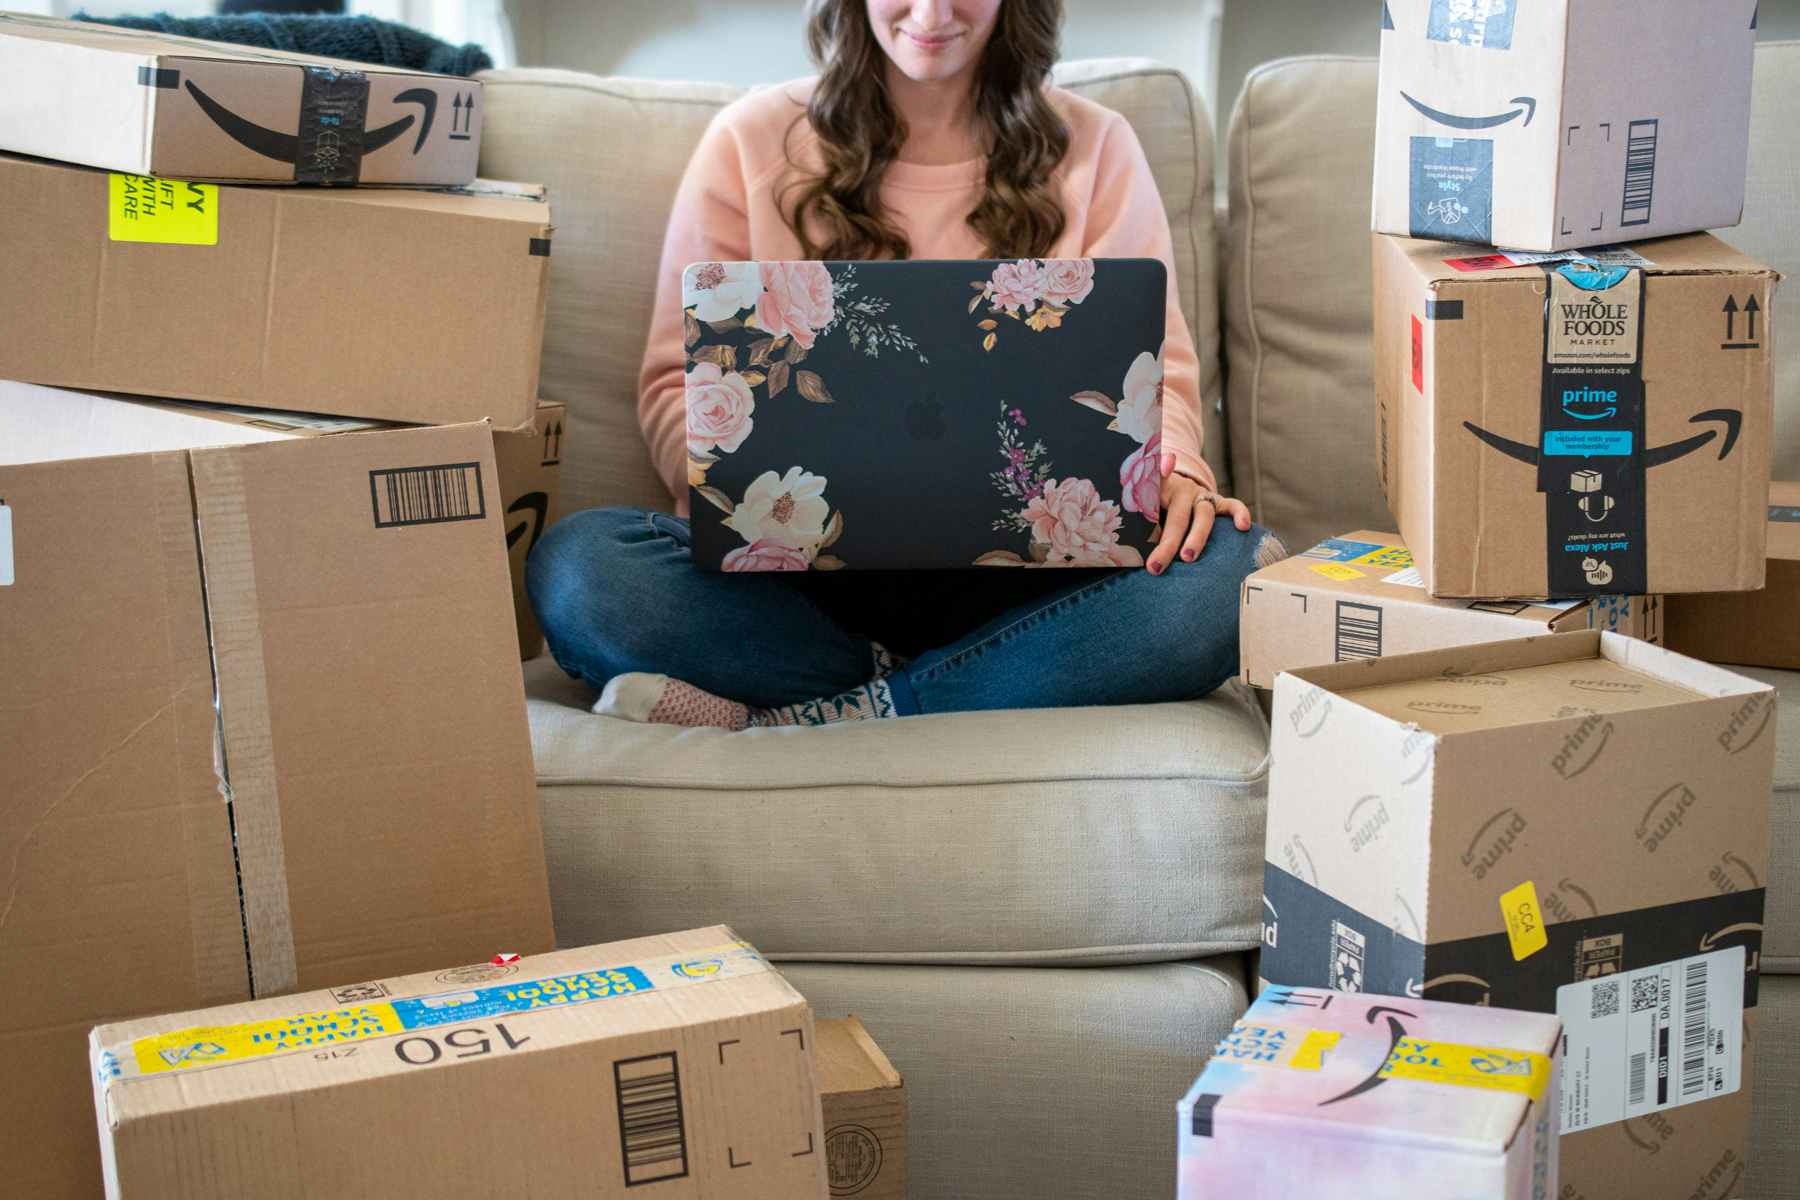 A woman sitting on a couch with a laptop computer on her lap, surrounded by stacks of Amazon delivery boxes.